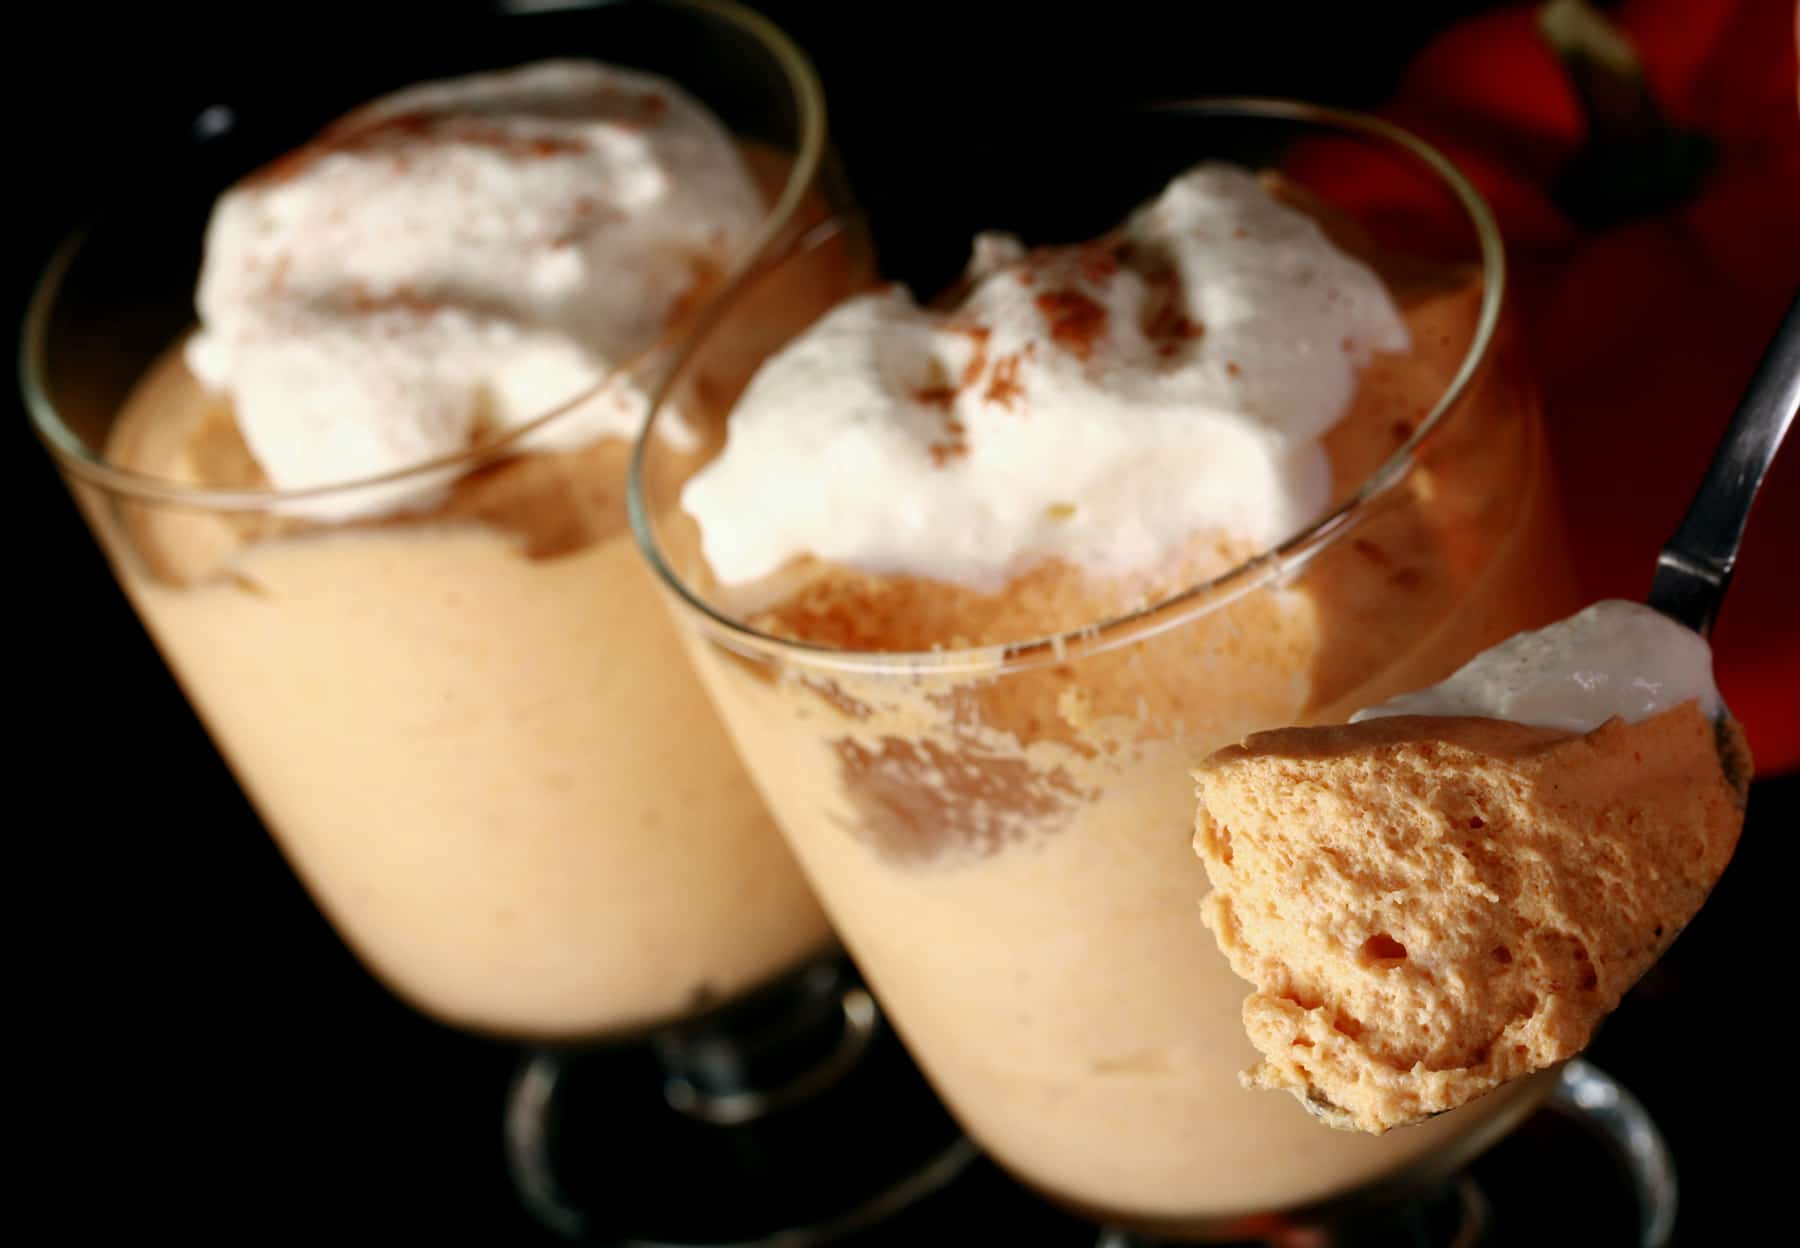 Two glasses with traditional maple pumpkin mousse in them. They are topped with whipped cream and a sprinkle of cinnamon. There is a spoon in the foreground with a generous helping of fluffy mousse.